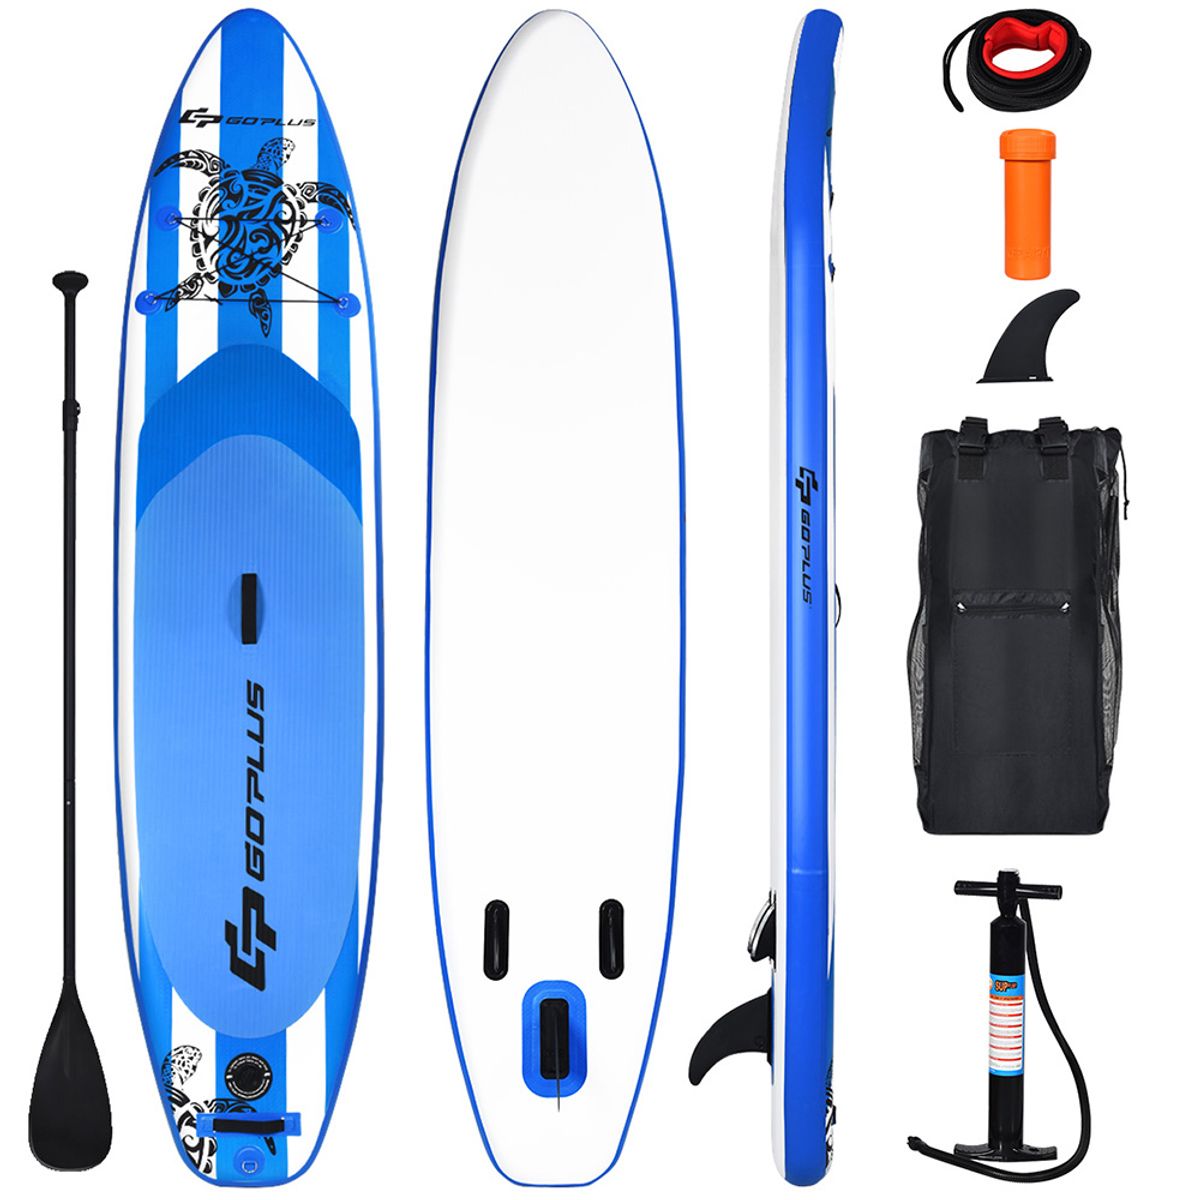 Photos - Paddleboard Costway Blue Honu Inflatable Stand-up Paddle Board - 11-Foot SUP SP36925 